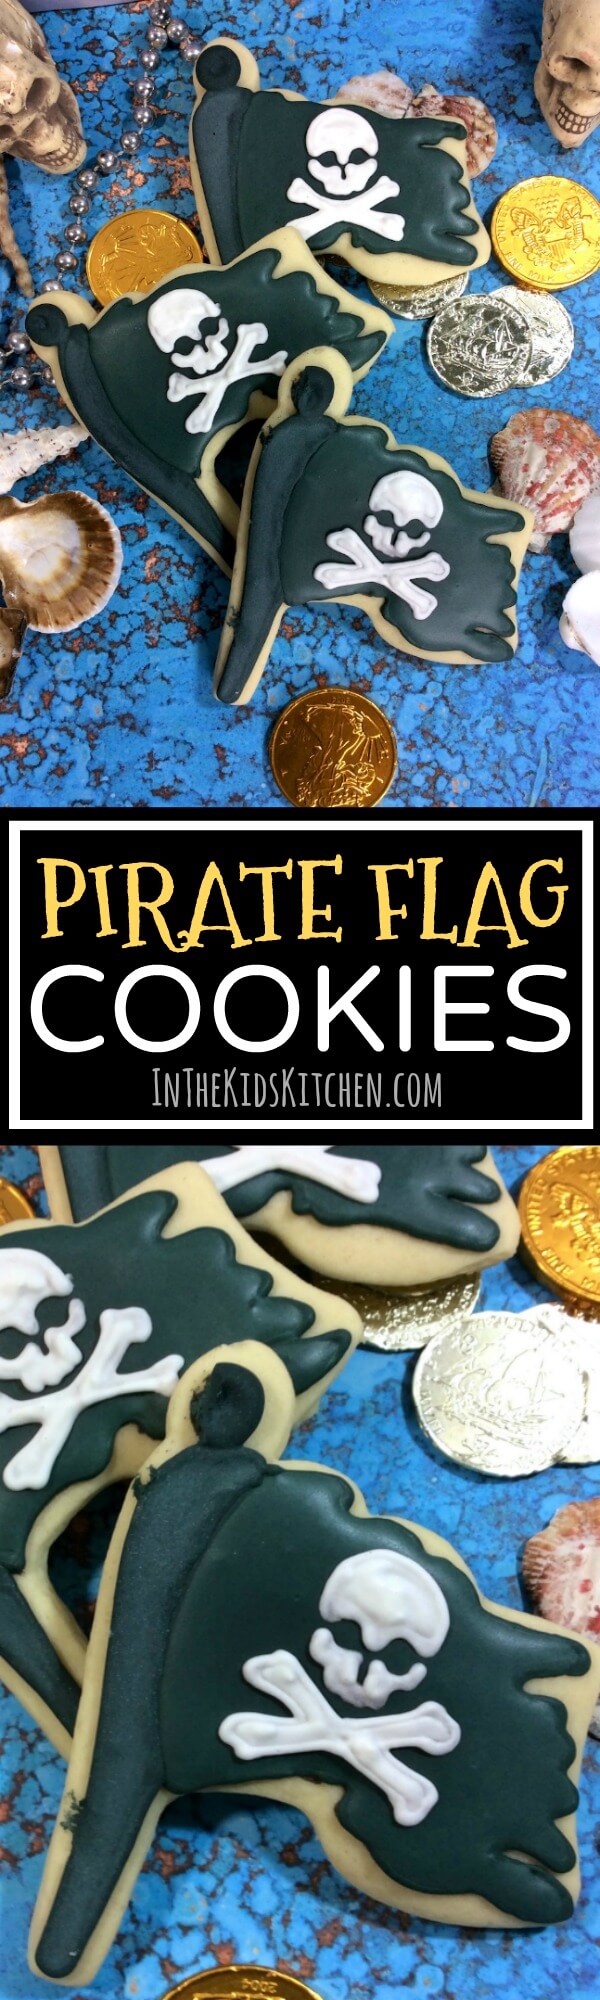 These pirate flag cookies are perfect for a pirate-themed kids birthday party or for a Pirates of the Caribbean movie night. Classic sugar cookie recipe.